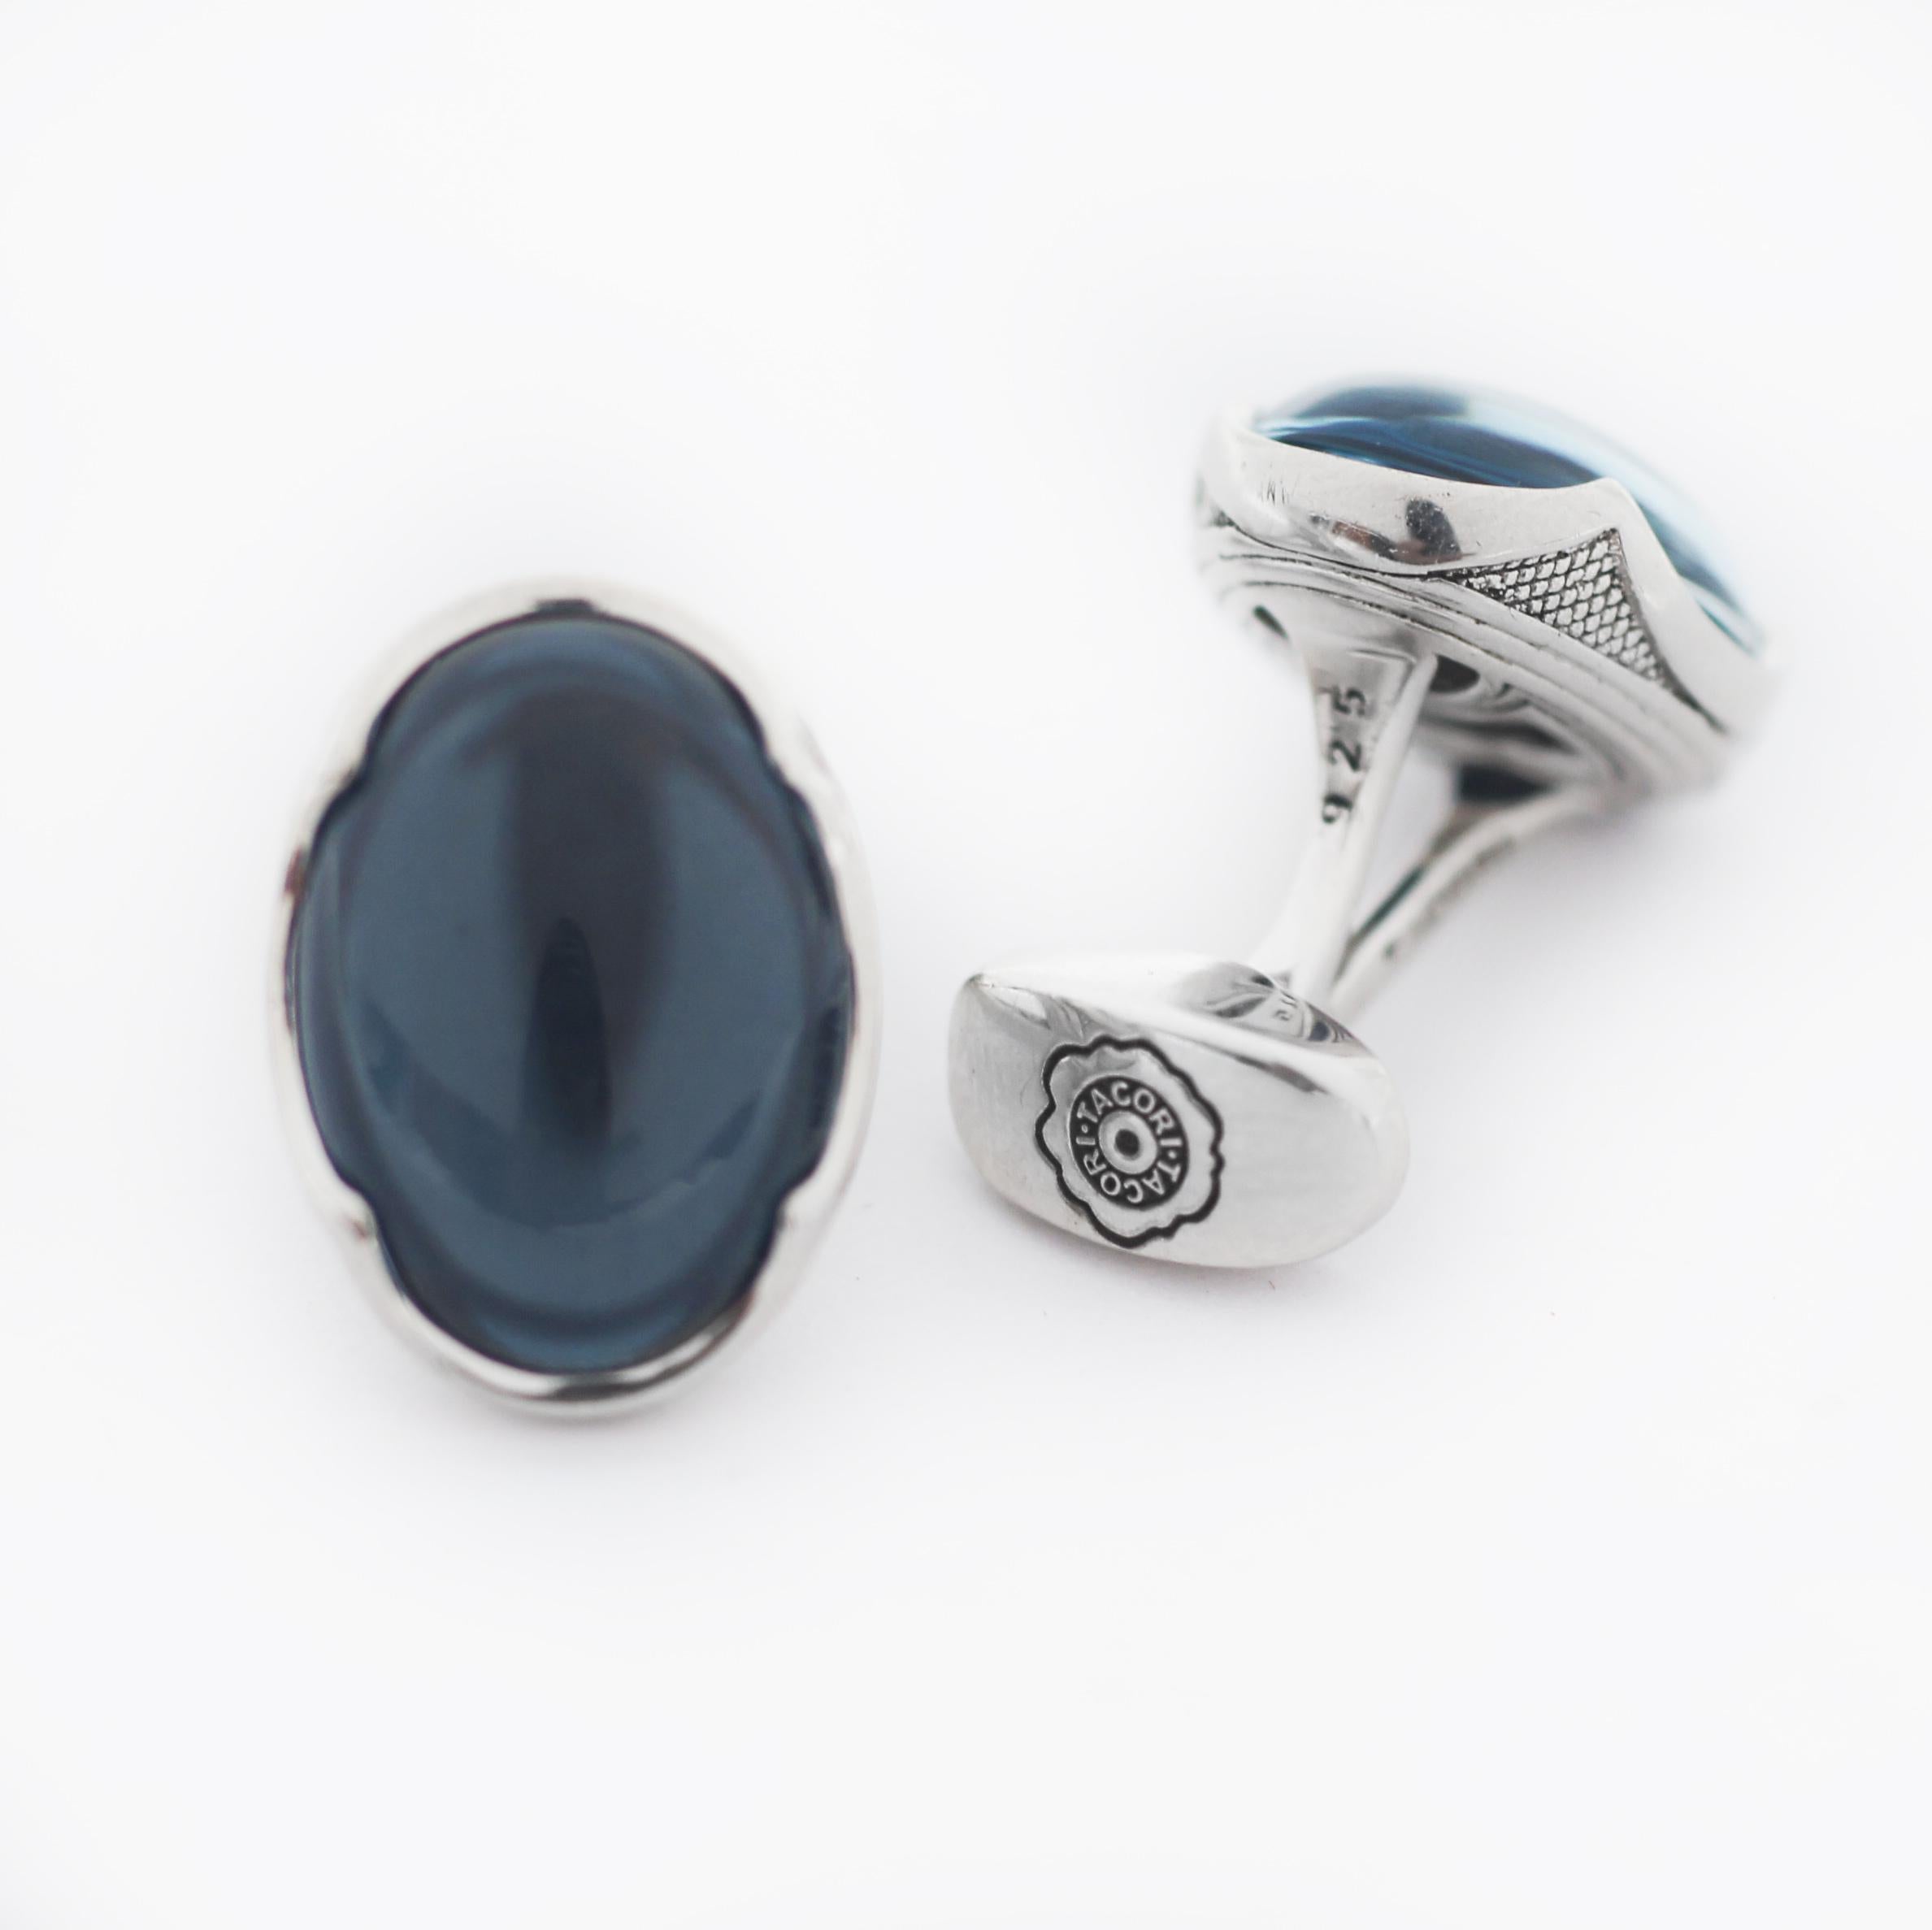 TACORI
925 Silver
Retro Classic
Oval Cabochon Cuff Links
featuring:
Oval Sky Blue Topaz over Hematite gemstone cuff links cradled in a silver signature Tacori crescent cut. This piece adds a sophisticated finish to your shirt cuffs and an unexpected